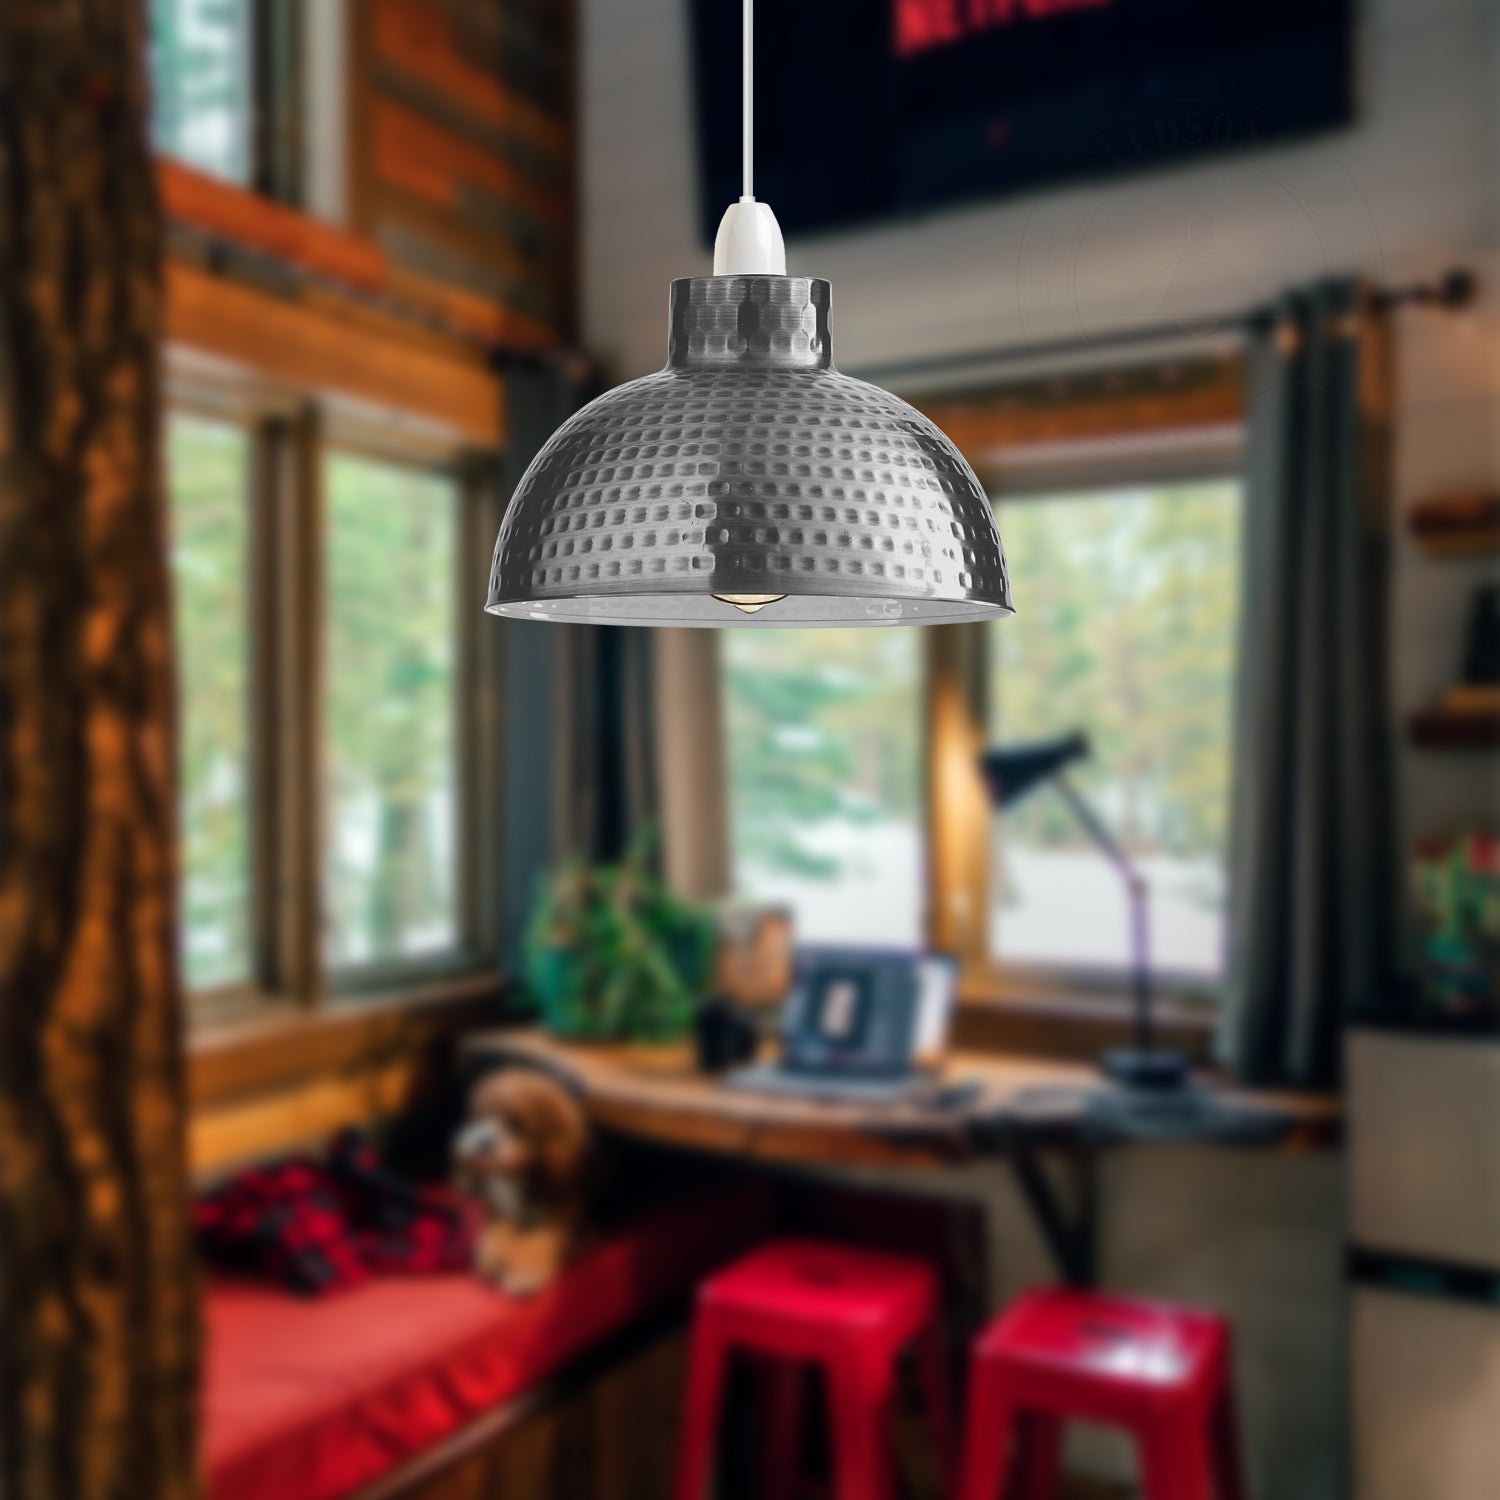 Retro Dome Light Shade Easy Fit 260mm Pendant Lampshade Fixture-Application image